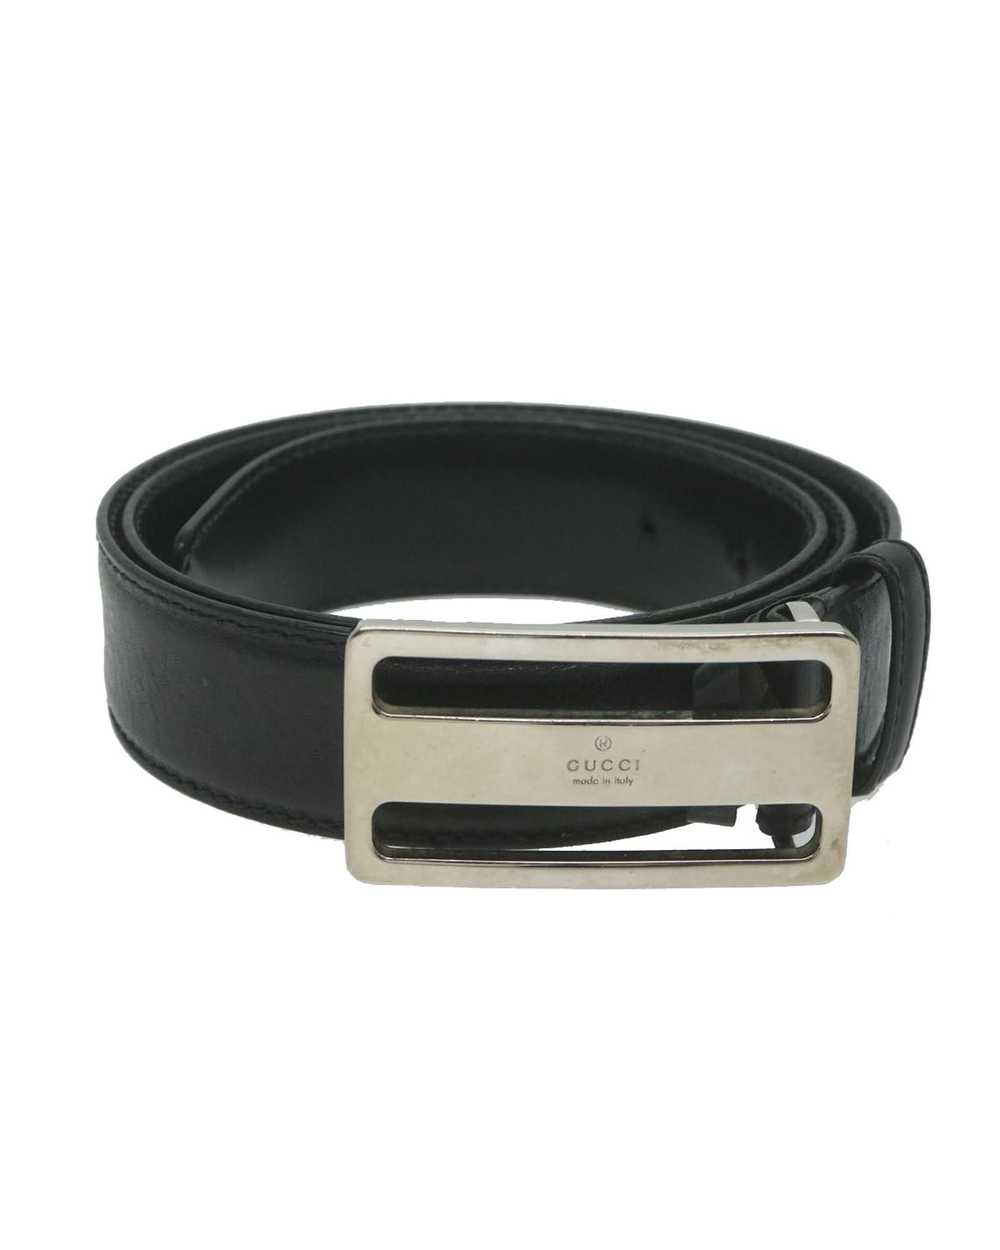 Gucci Premium Black Leather Belt with Timeless Ap… - image 2